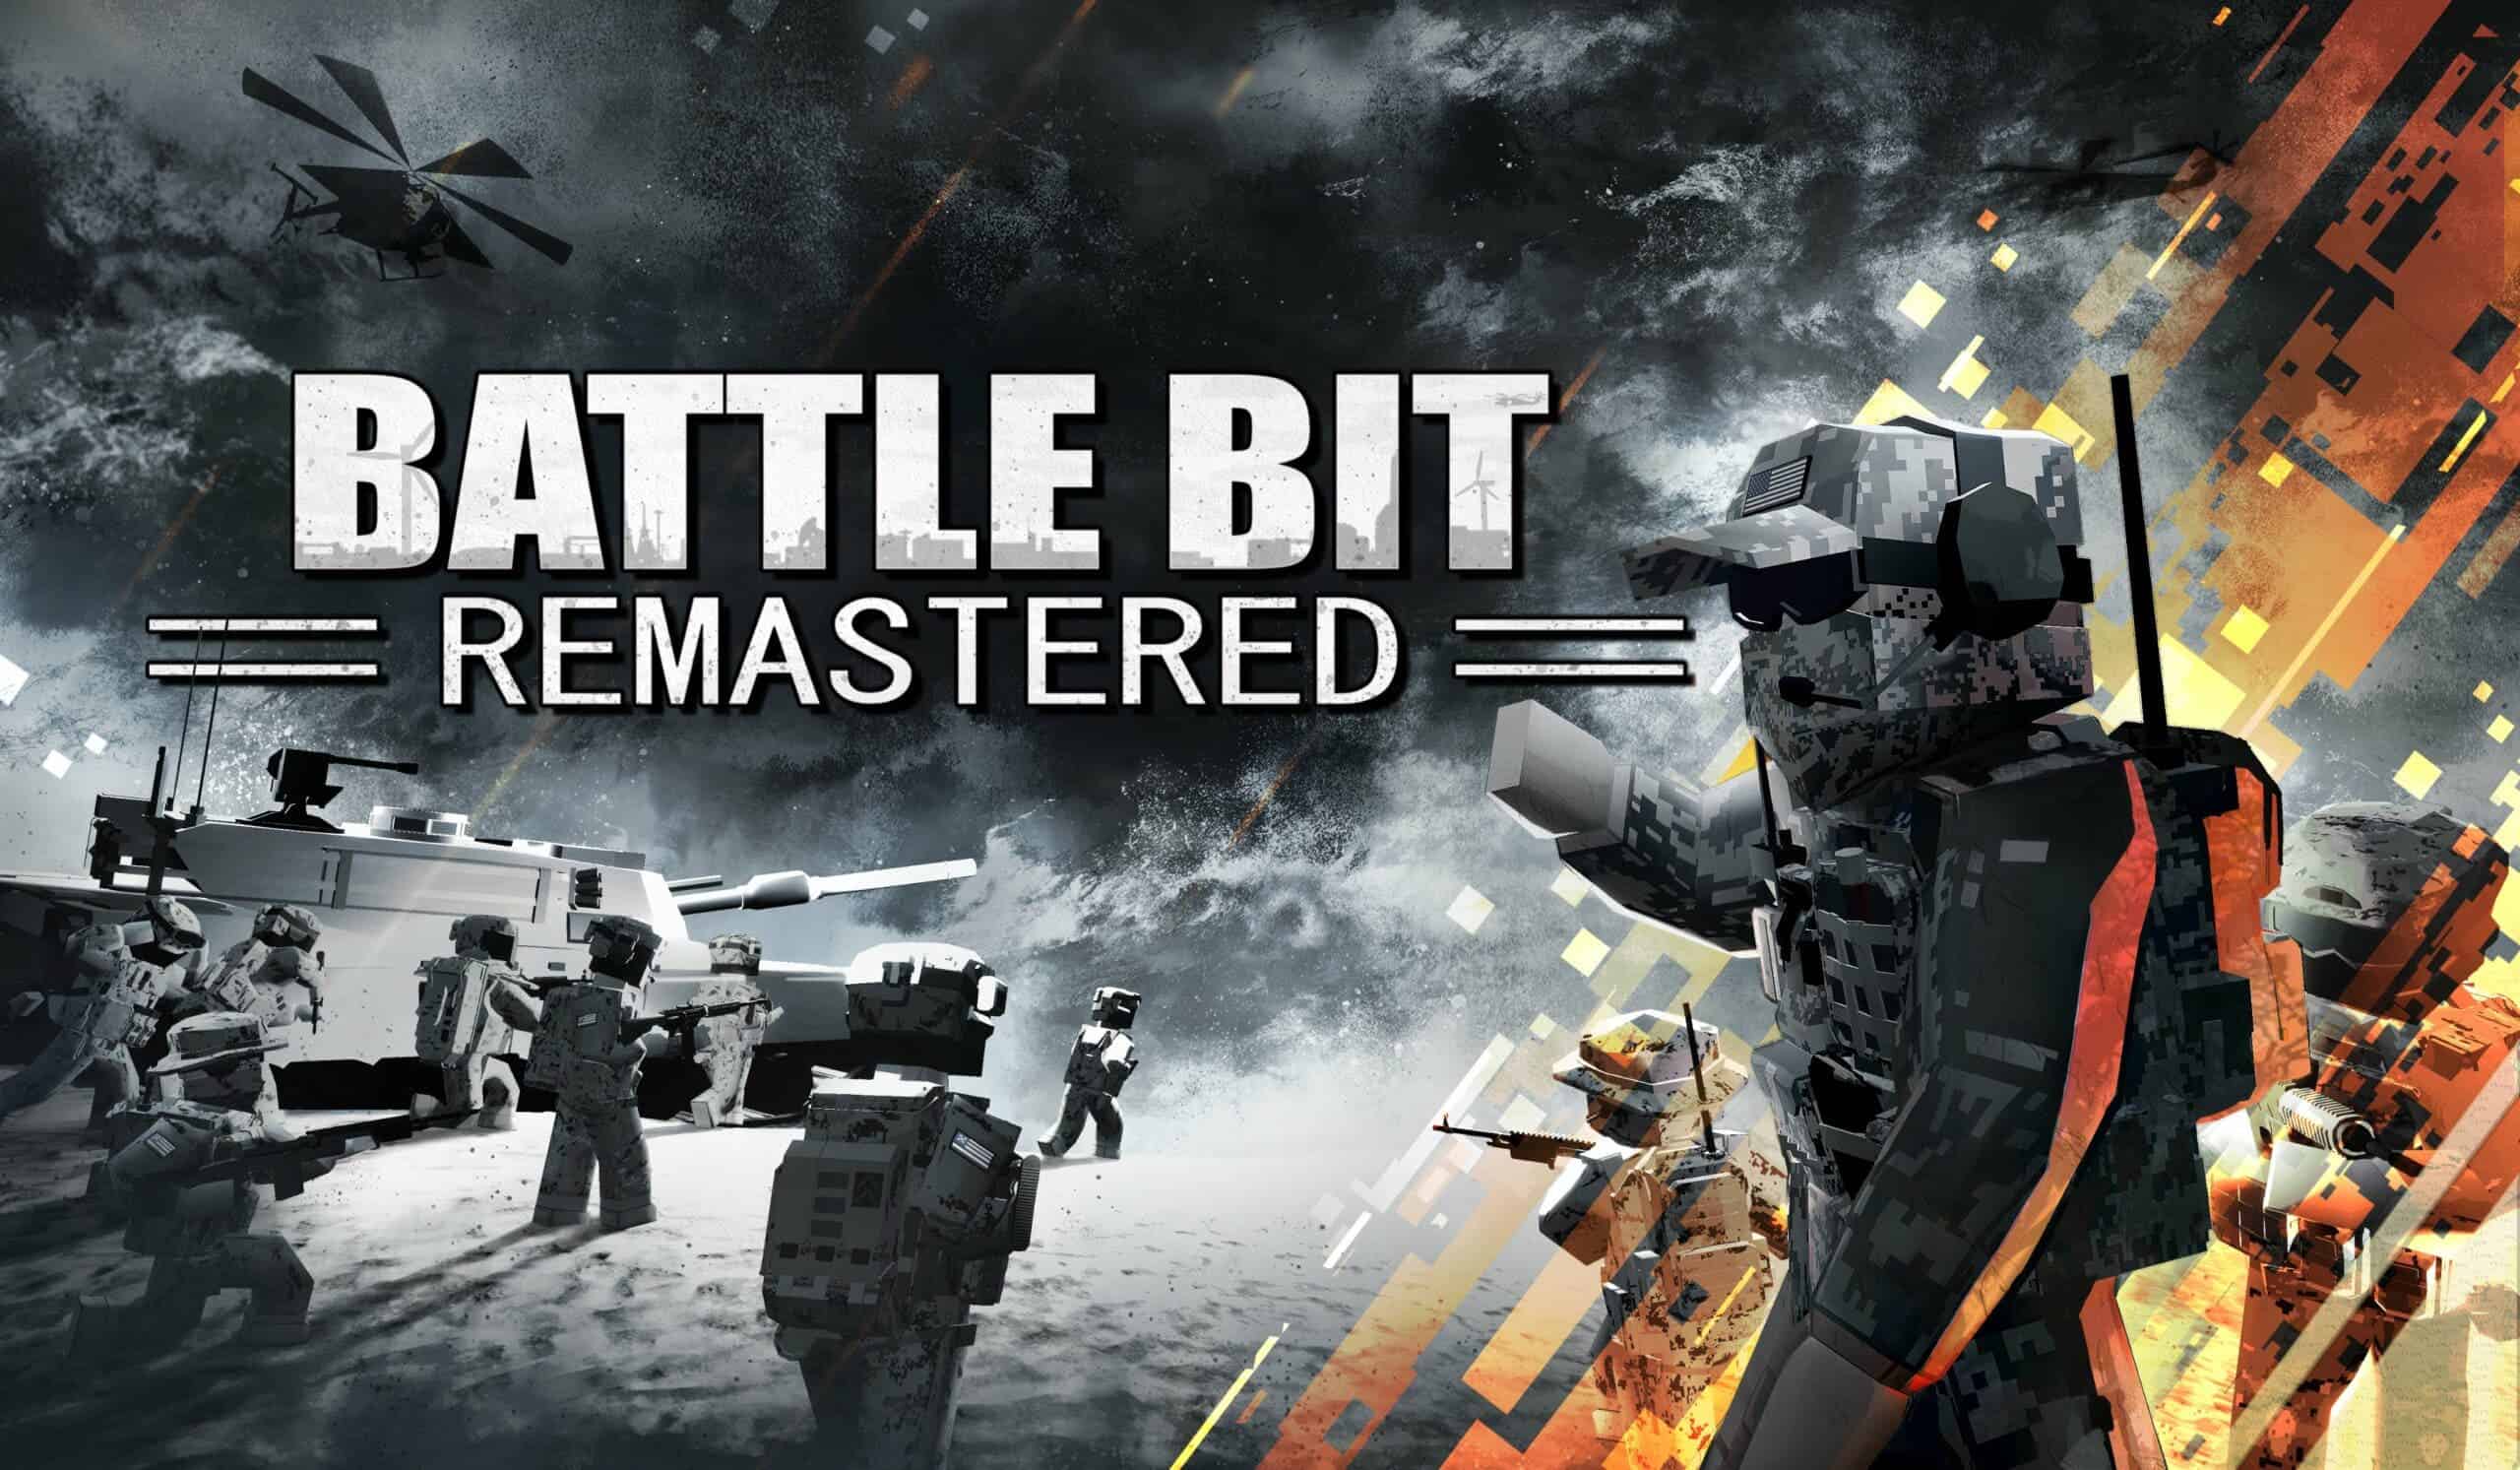 From Small Team to Best-Seller: BattleBit Remastered